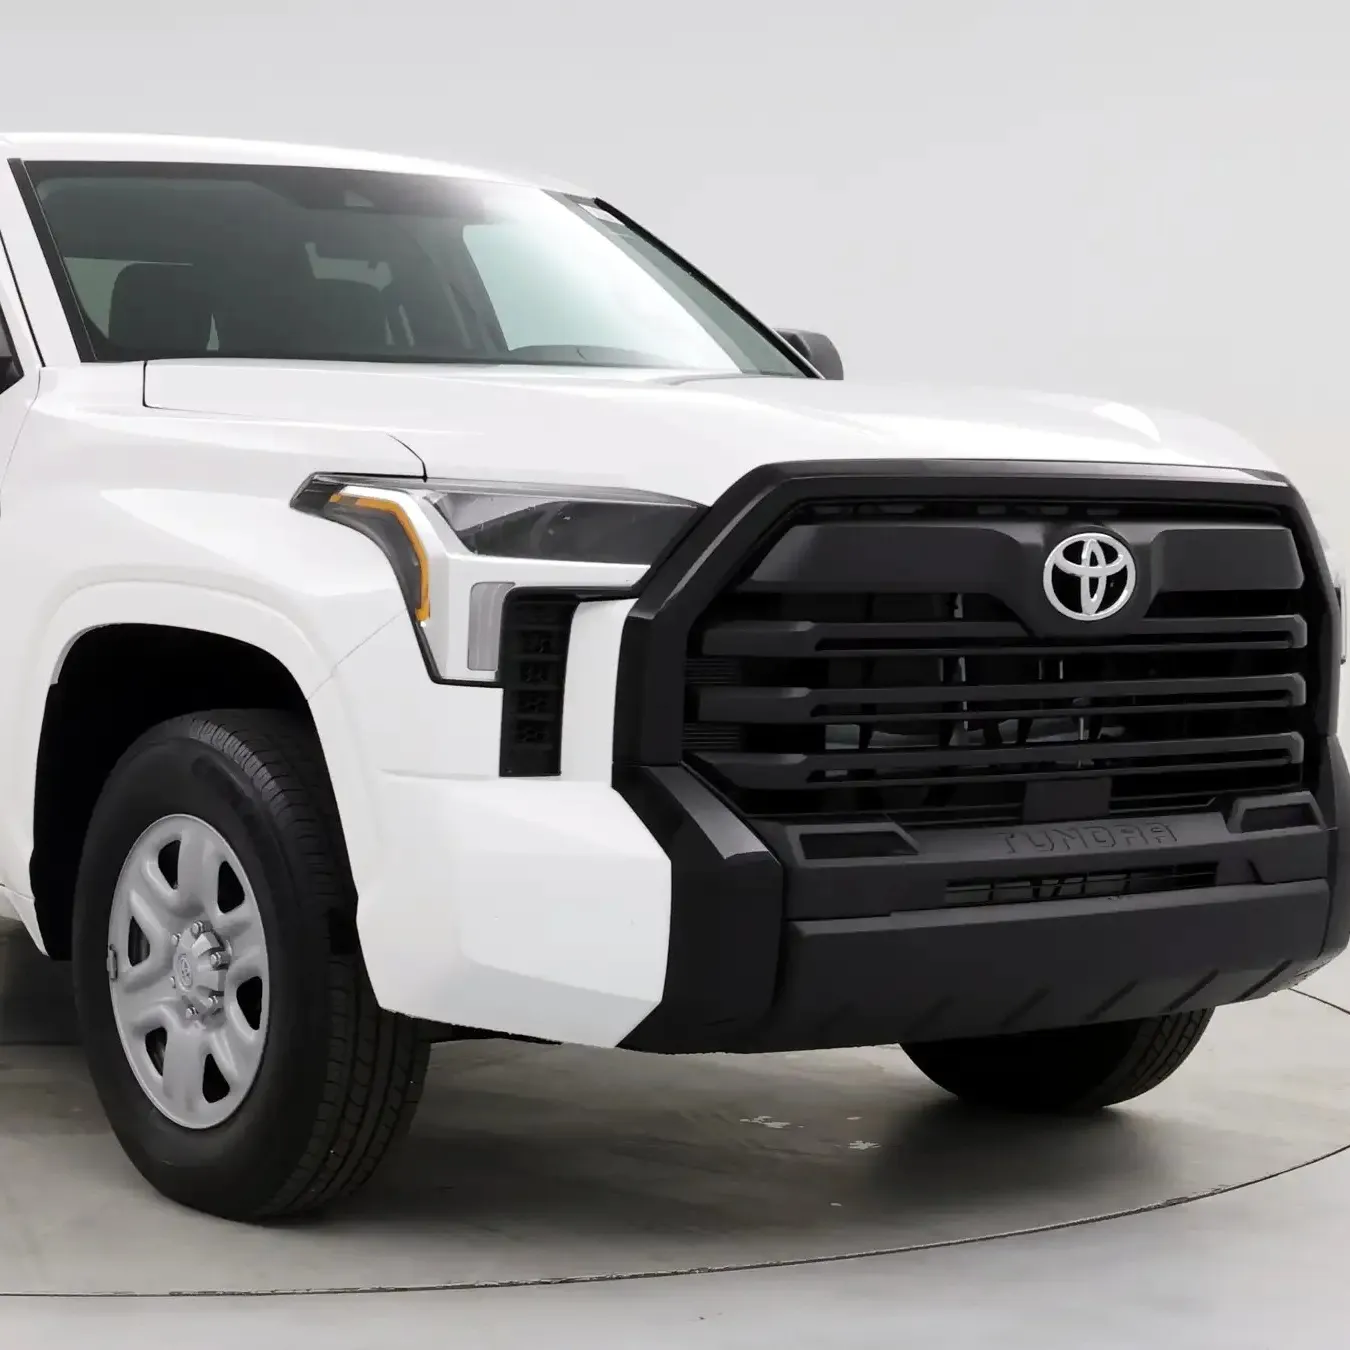 2022 T OYOTA TUNDRA WHITE LHD OPTION CHEAP SECOND HAND CAR LOW MILEAGE FOR SALE EUROPE USED SUV